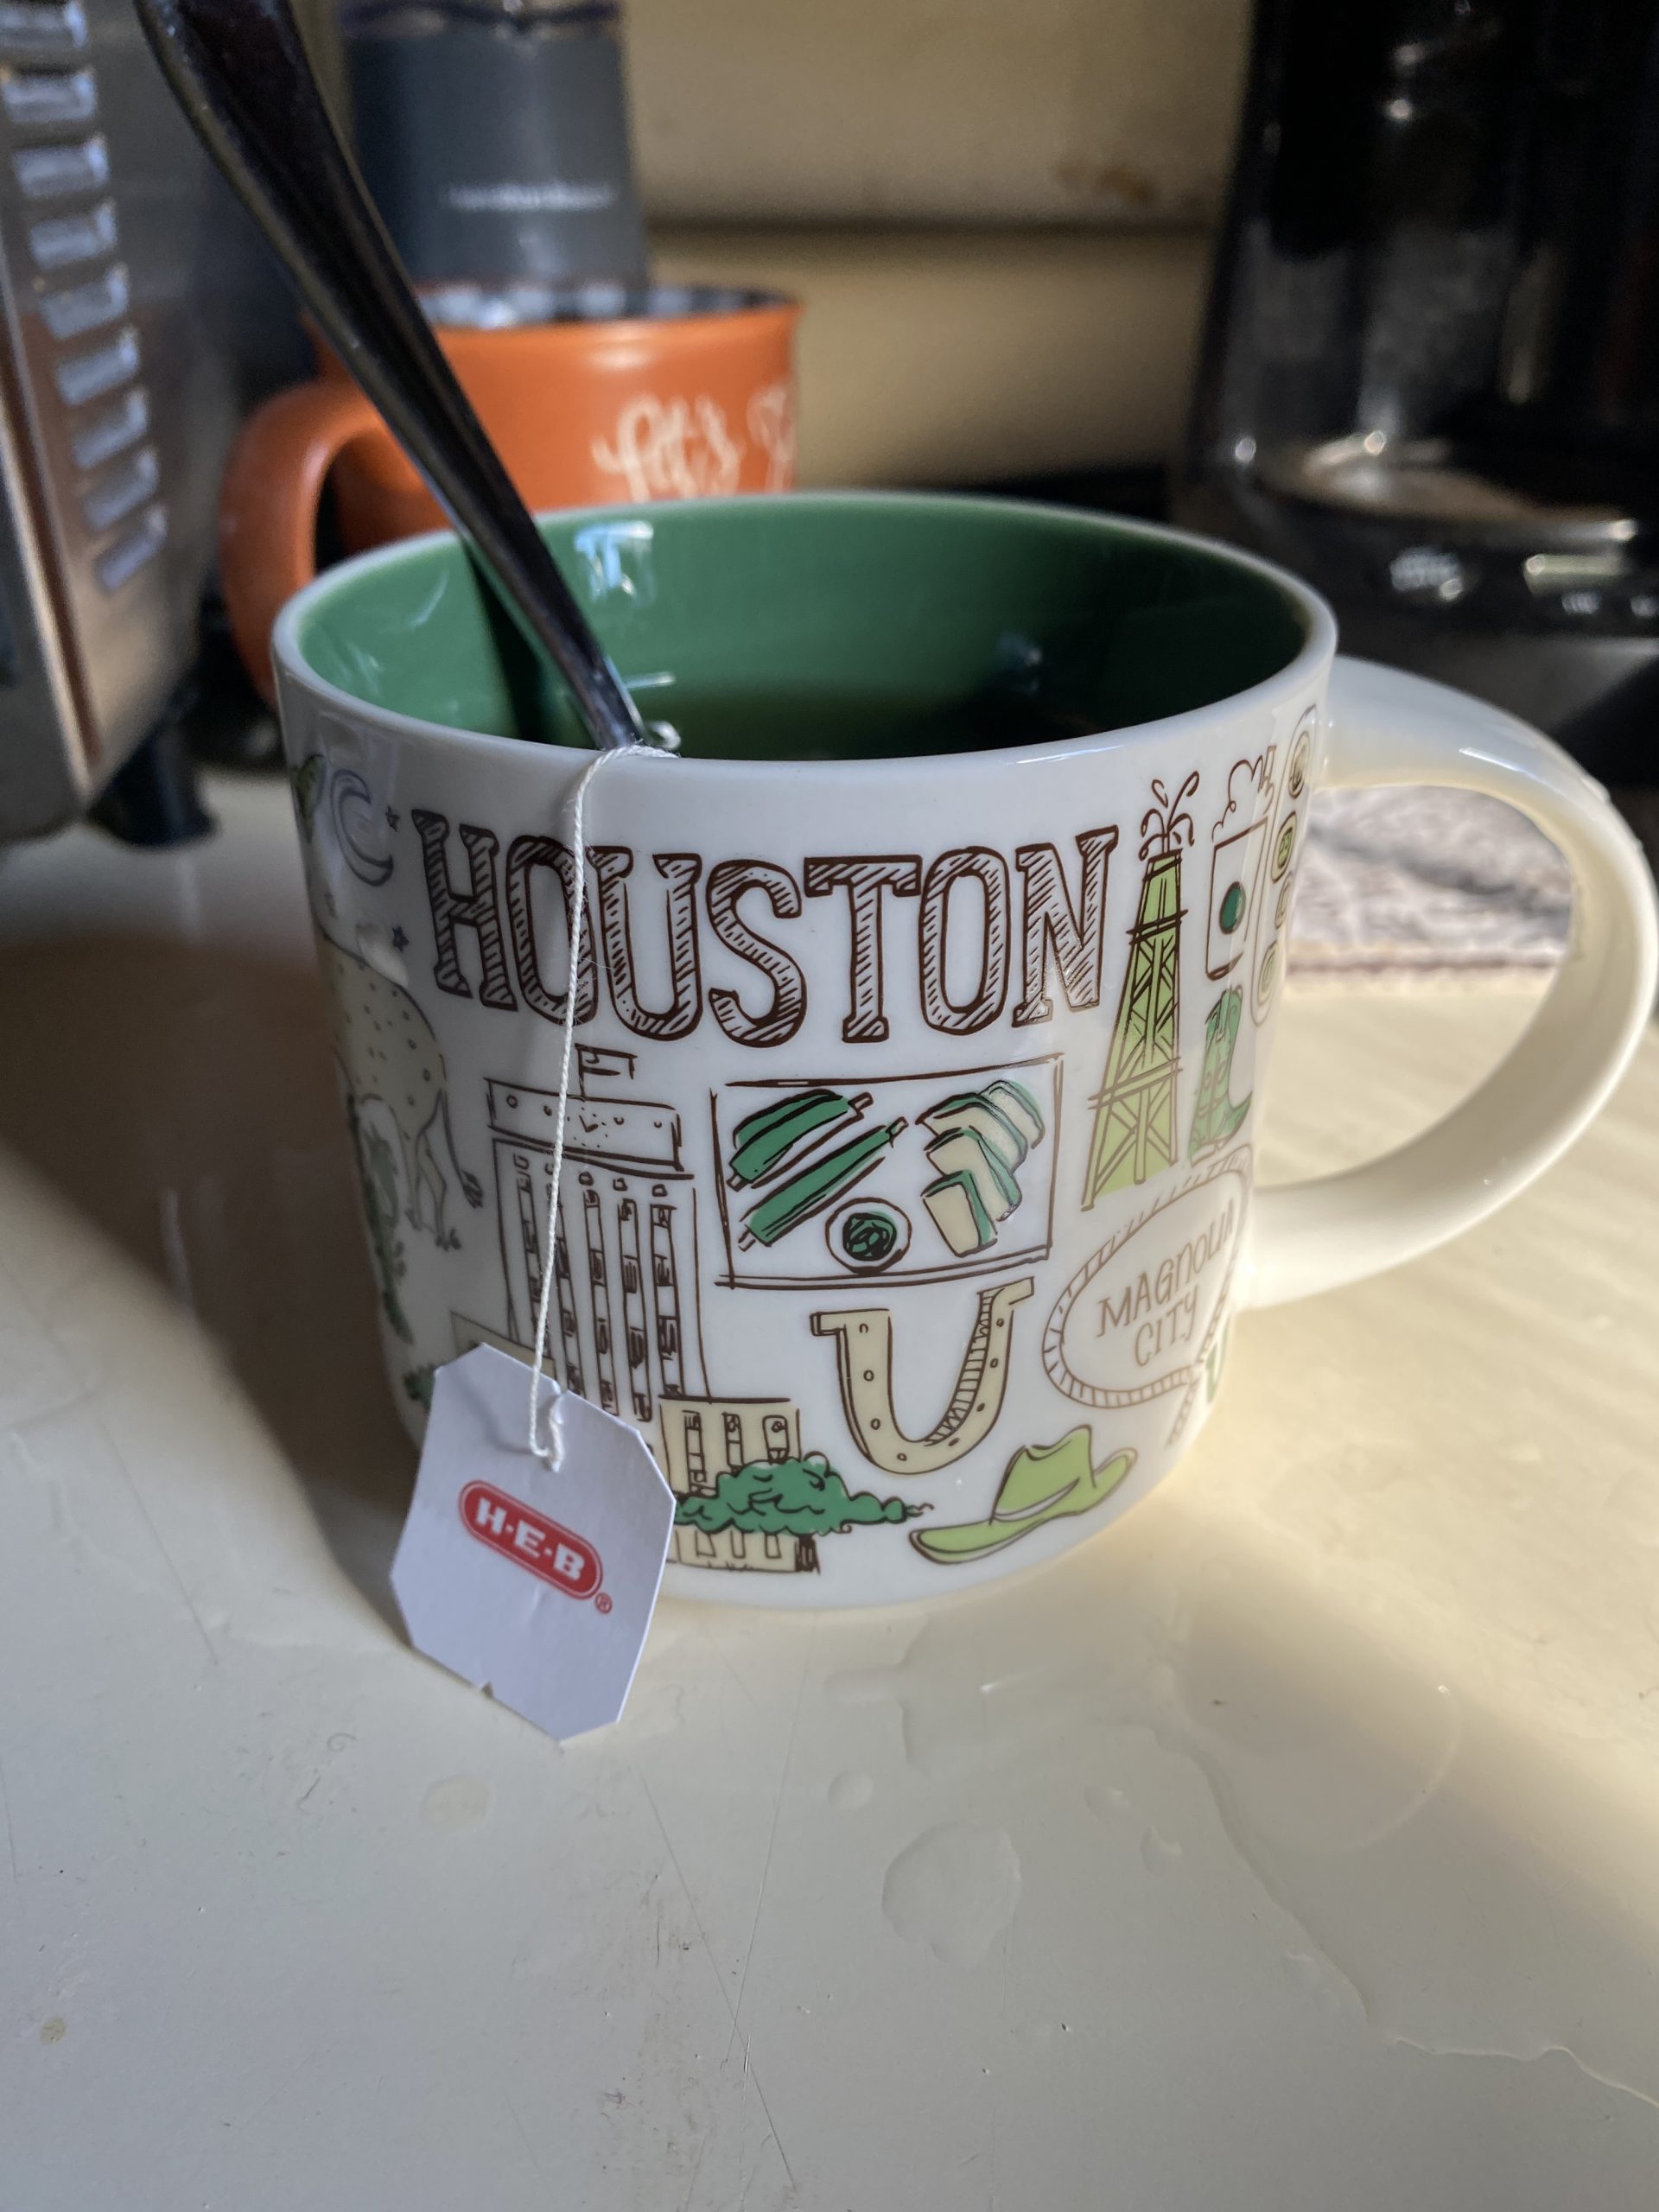 Houston "YOU ARE HERE" Mug from Starbucks with HEB tea bag